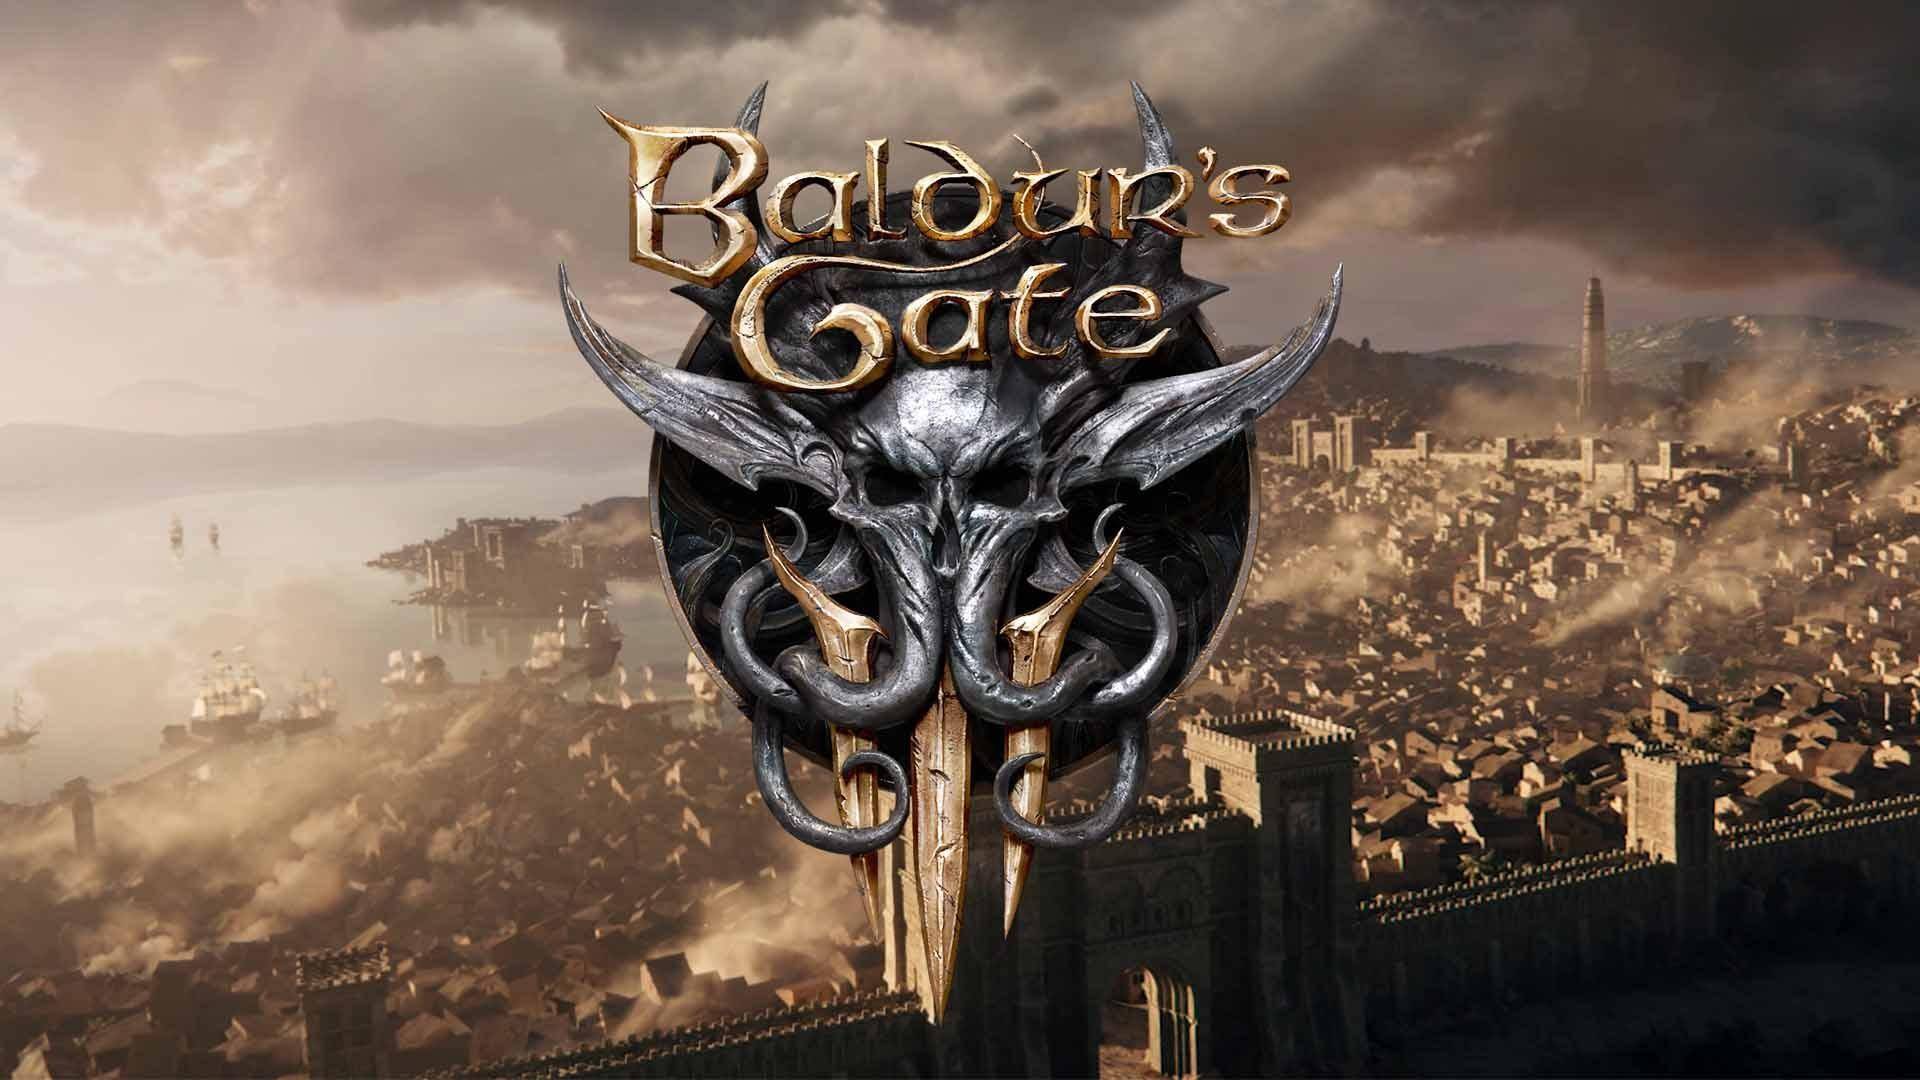 Baldur's Gate III will be  in Early Access this year